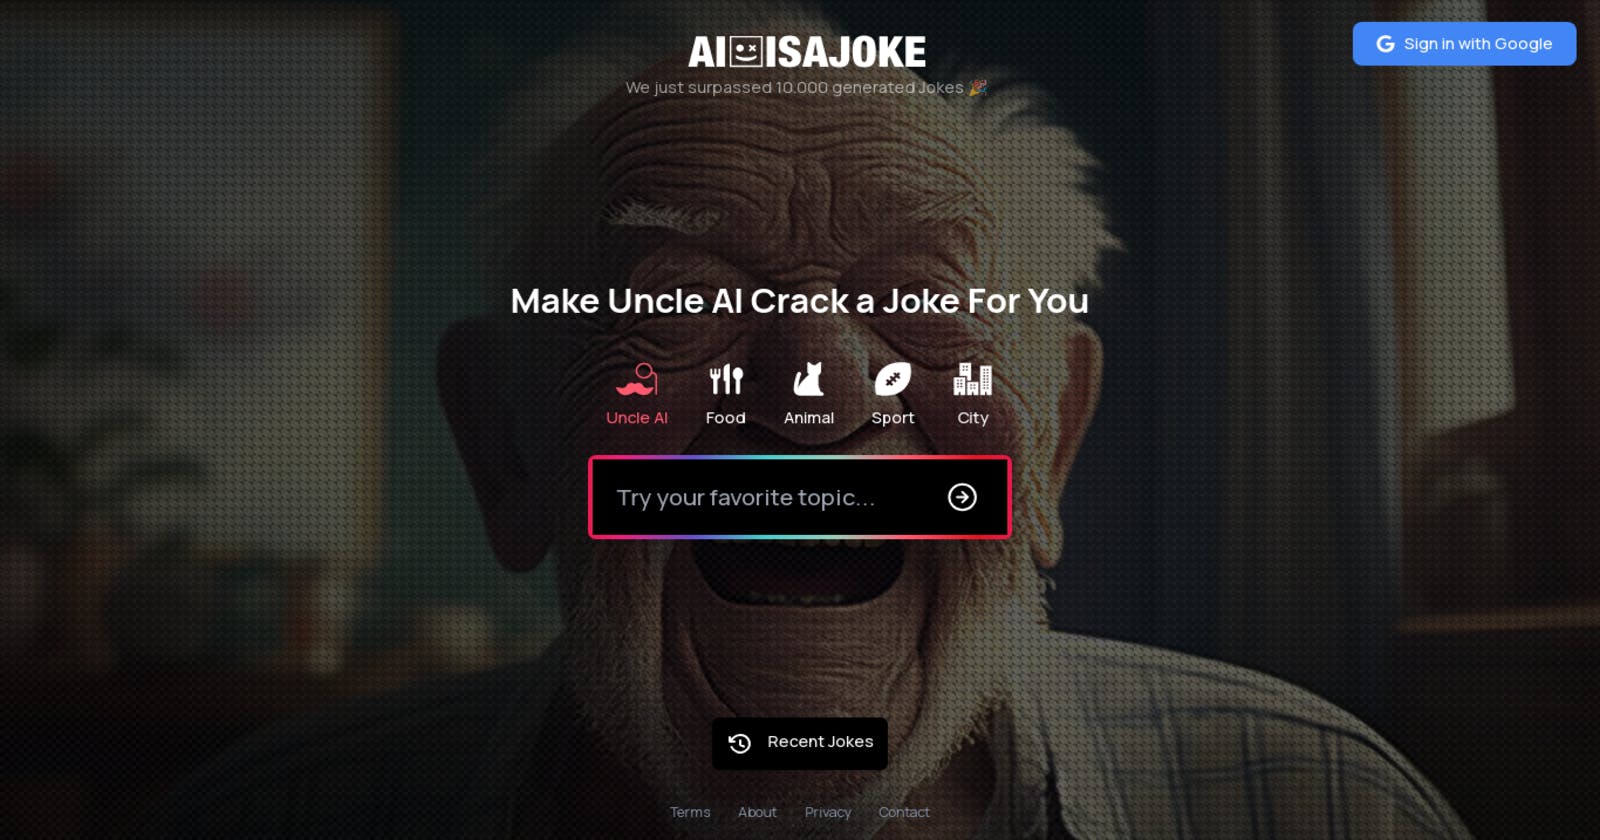 AI IS A JOKE - Your Ultimate Guide to Generating Hilarious Jokes with Artificial Intelligence